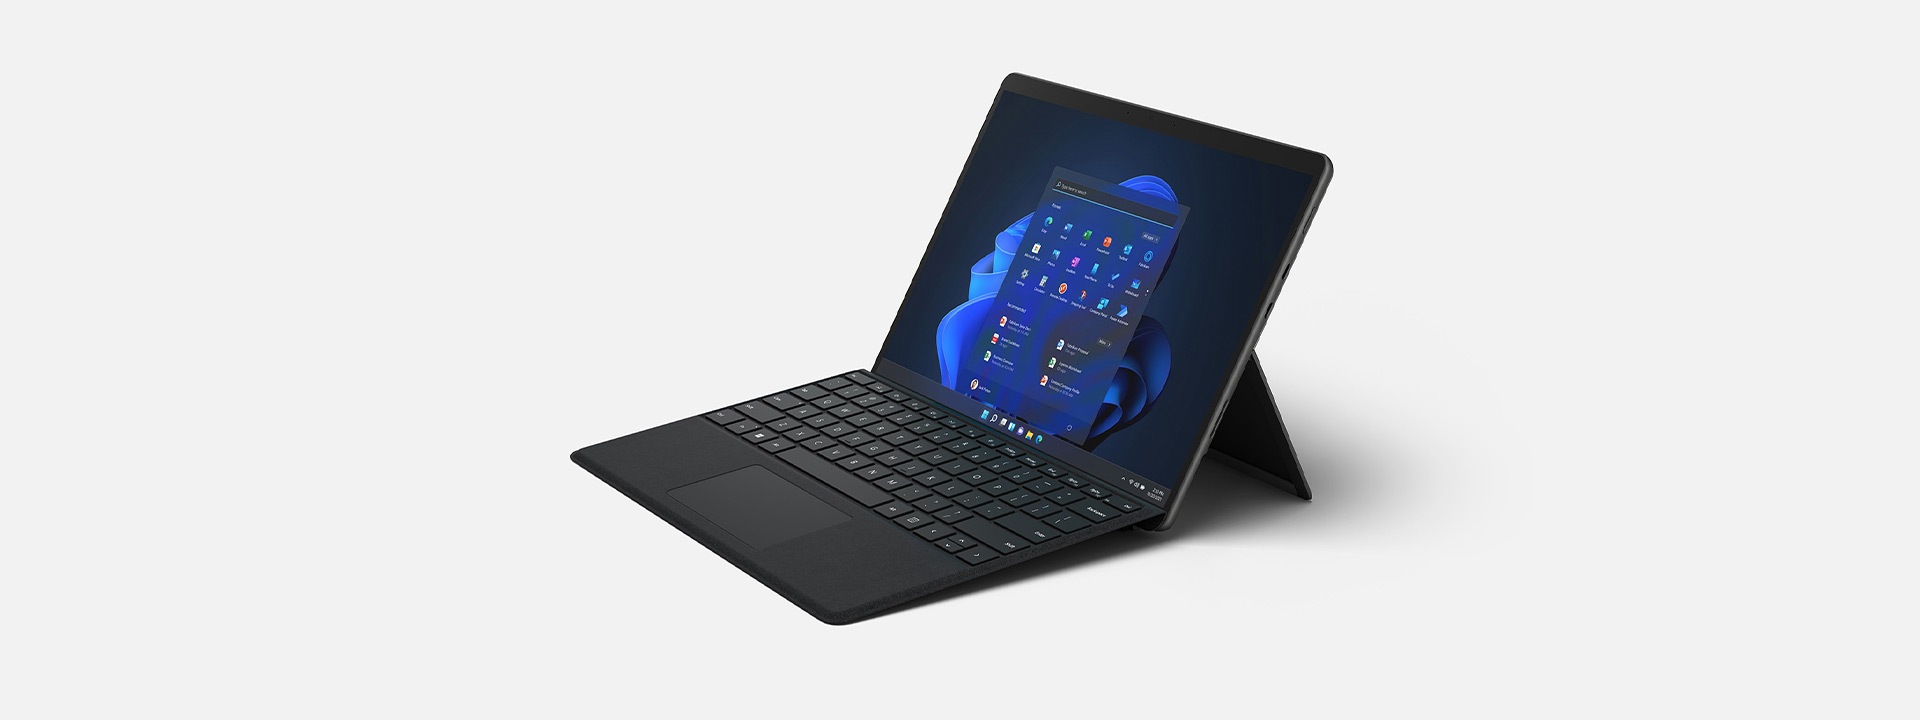 Render of Surface Pro 8 featuring Windows 11 screen